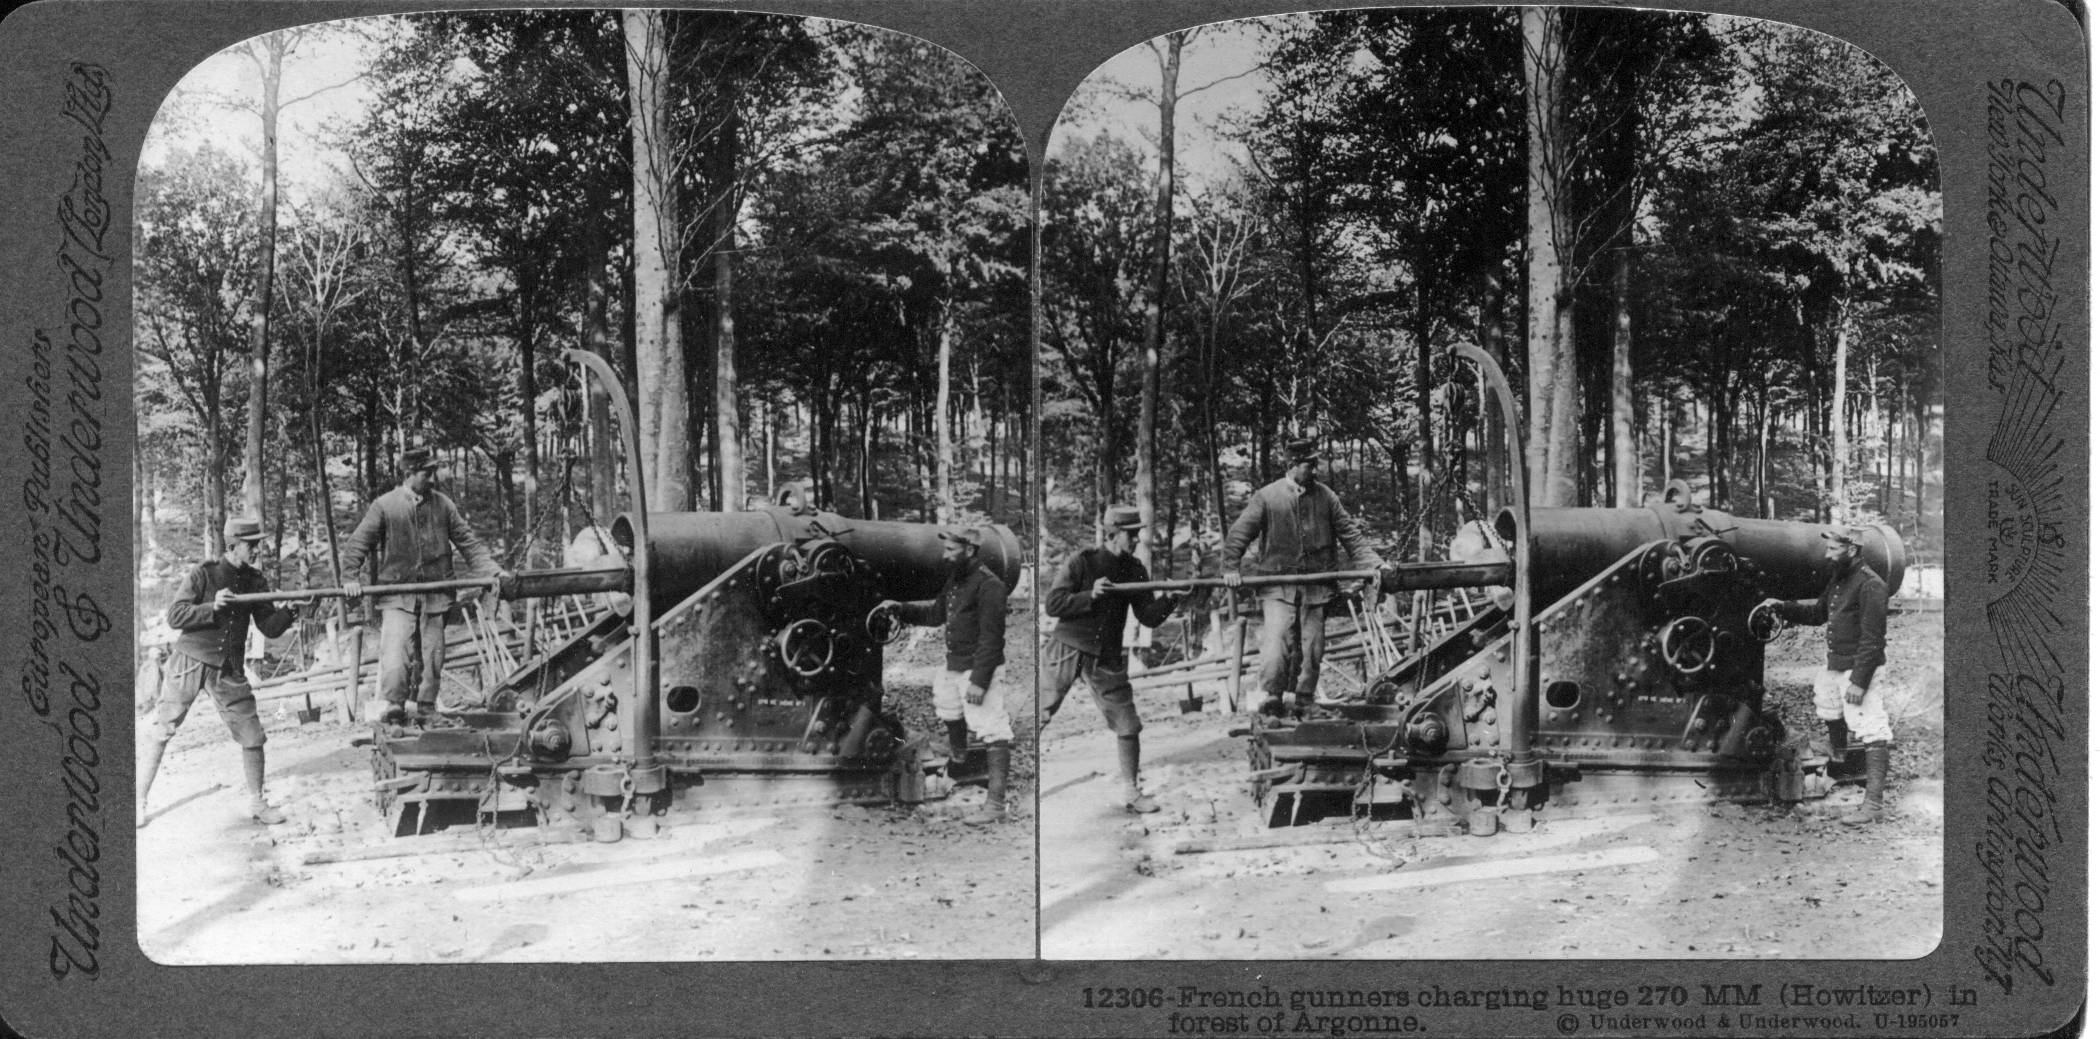 French gunners charging huge 270MM (Howitzer) in forest of Argonne